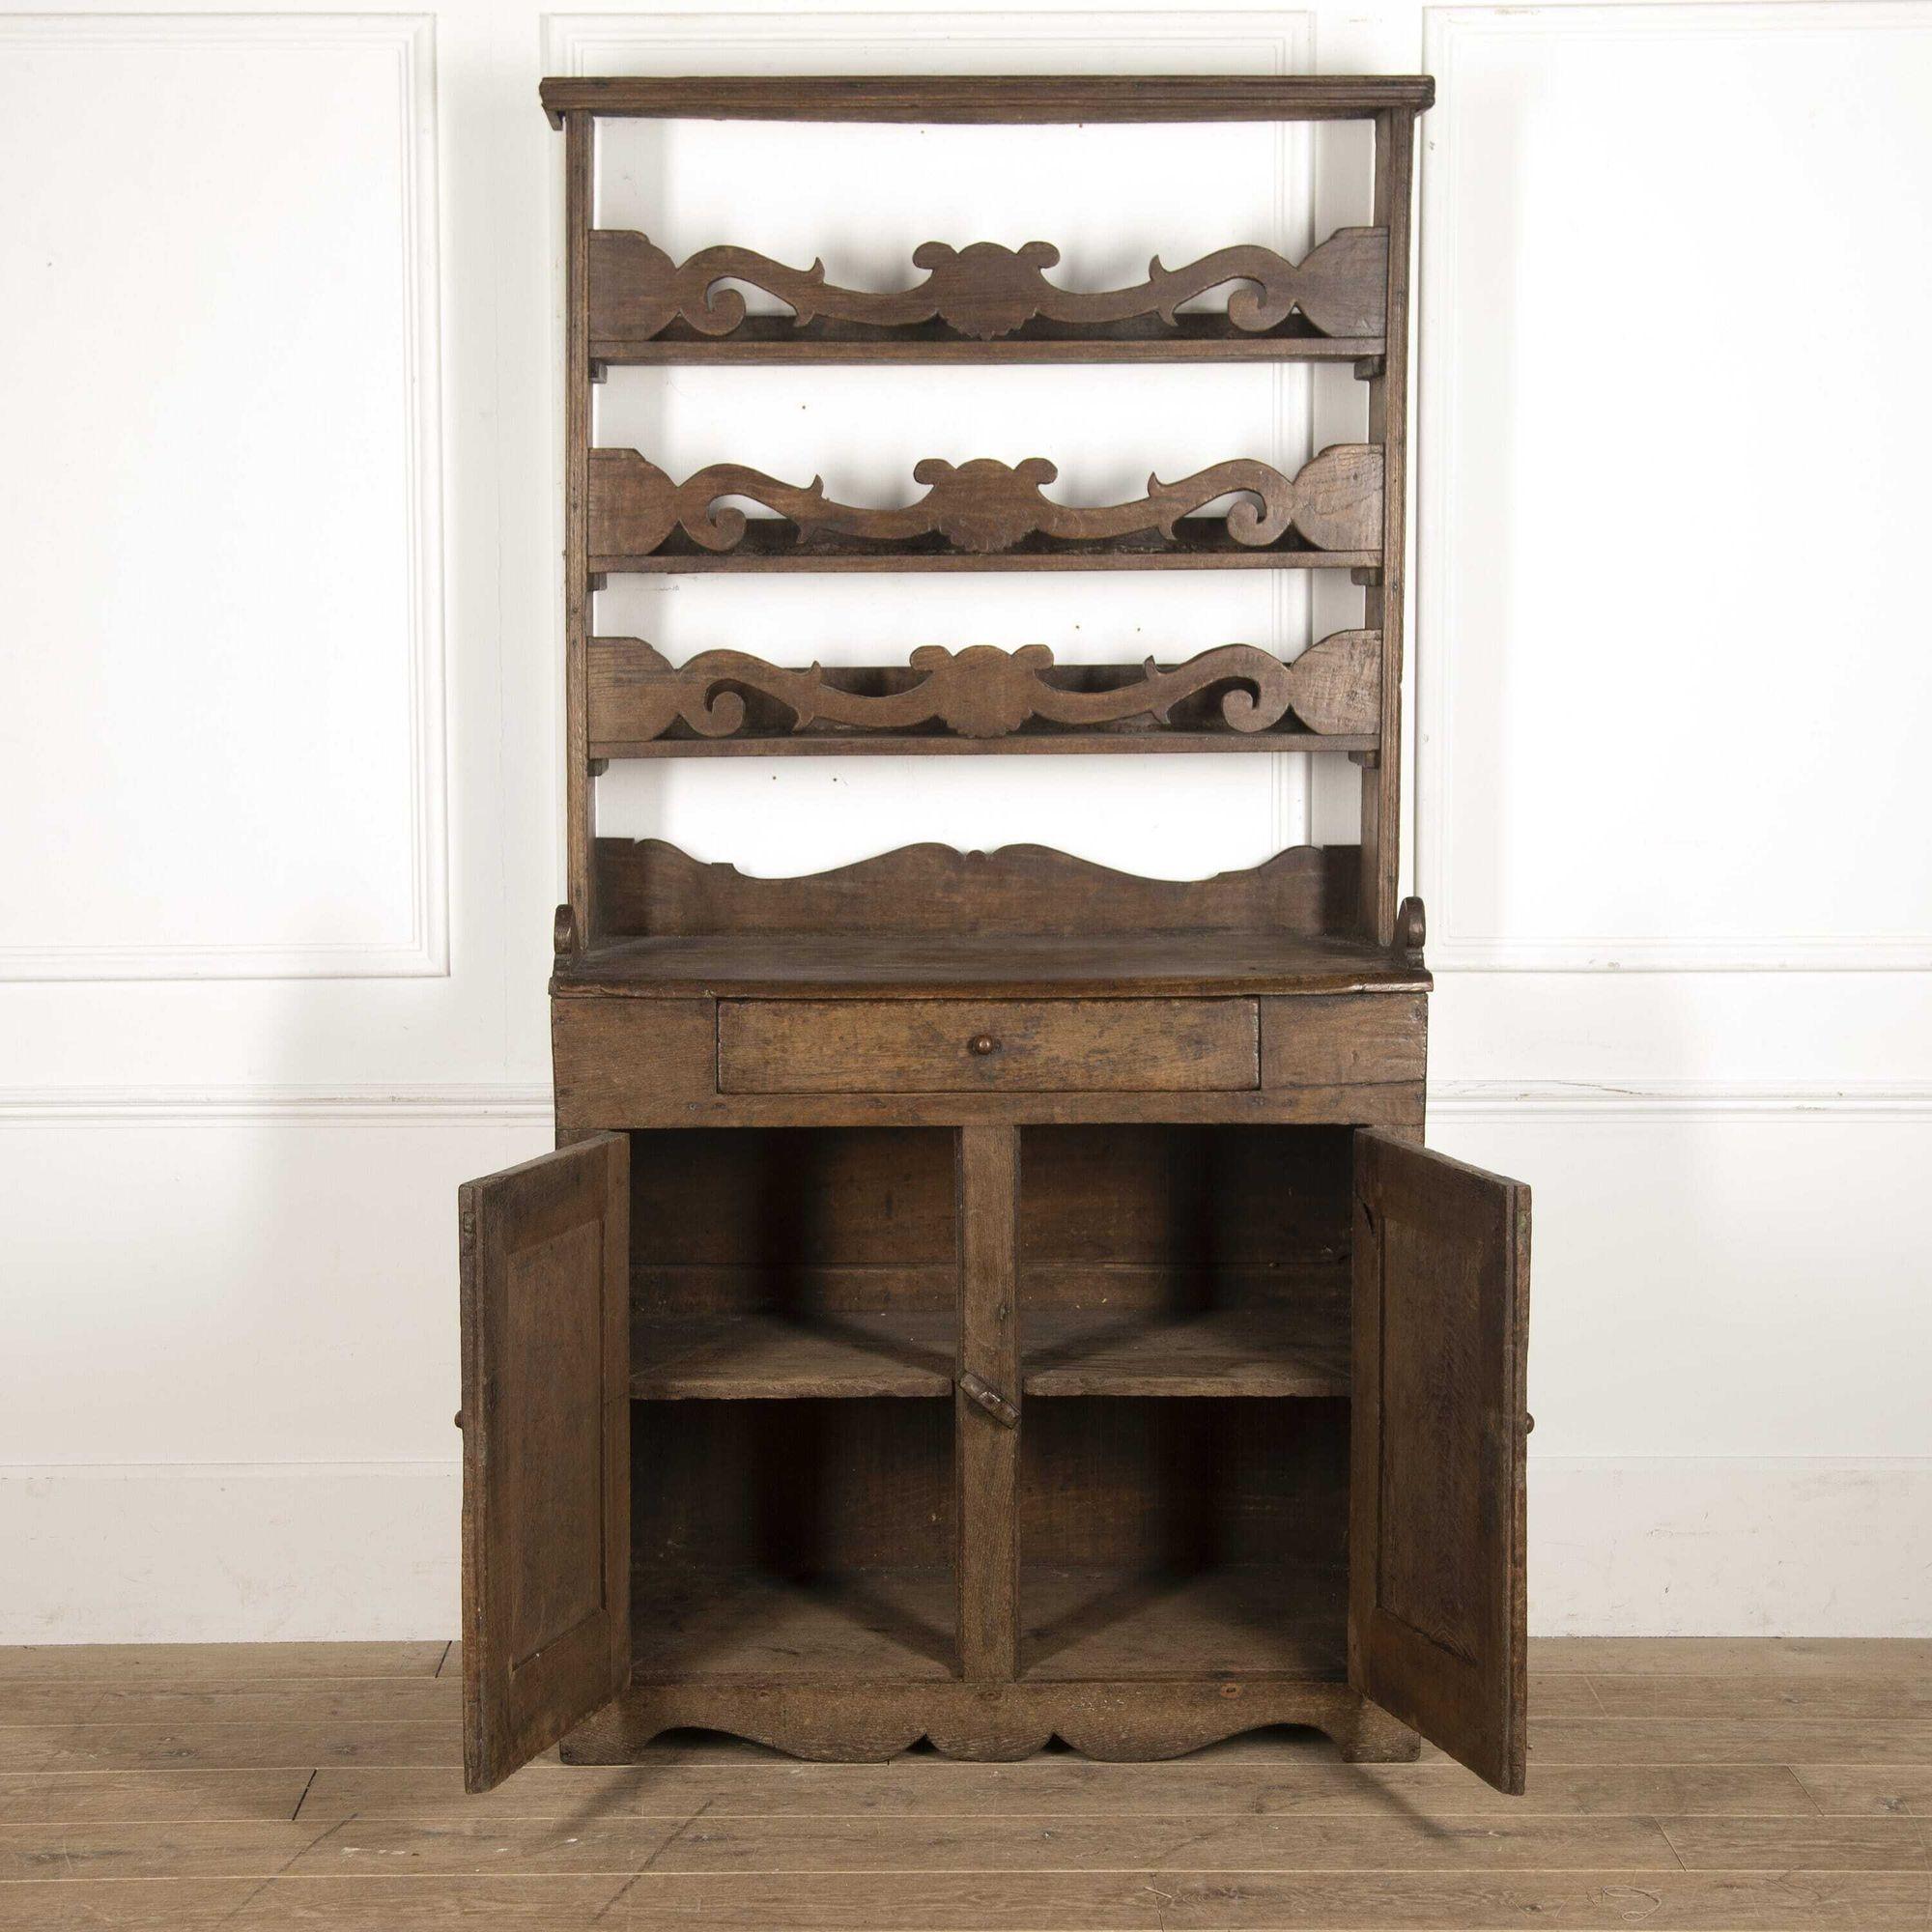 Stunning 17th century florentine chestnut dresser.
Dating from the 17th Century, this imposing Italian baroque dresser in chestnut has a supersture containing three shelves with pierced double scroll fronts.
These shelves sit above a twin door